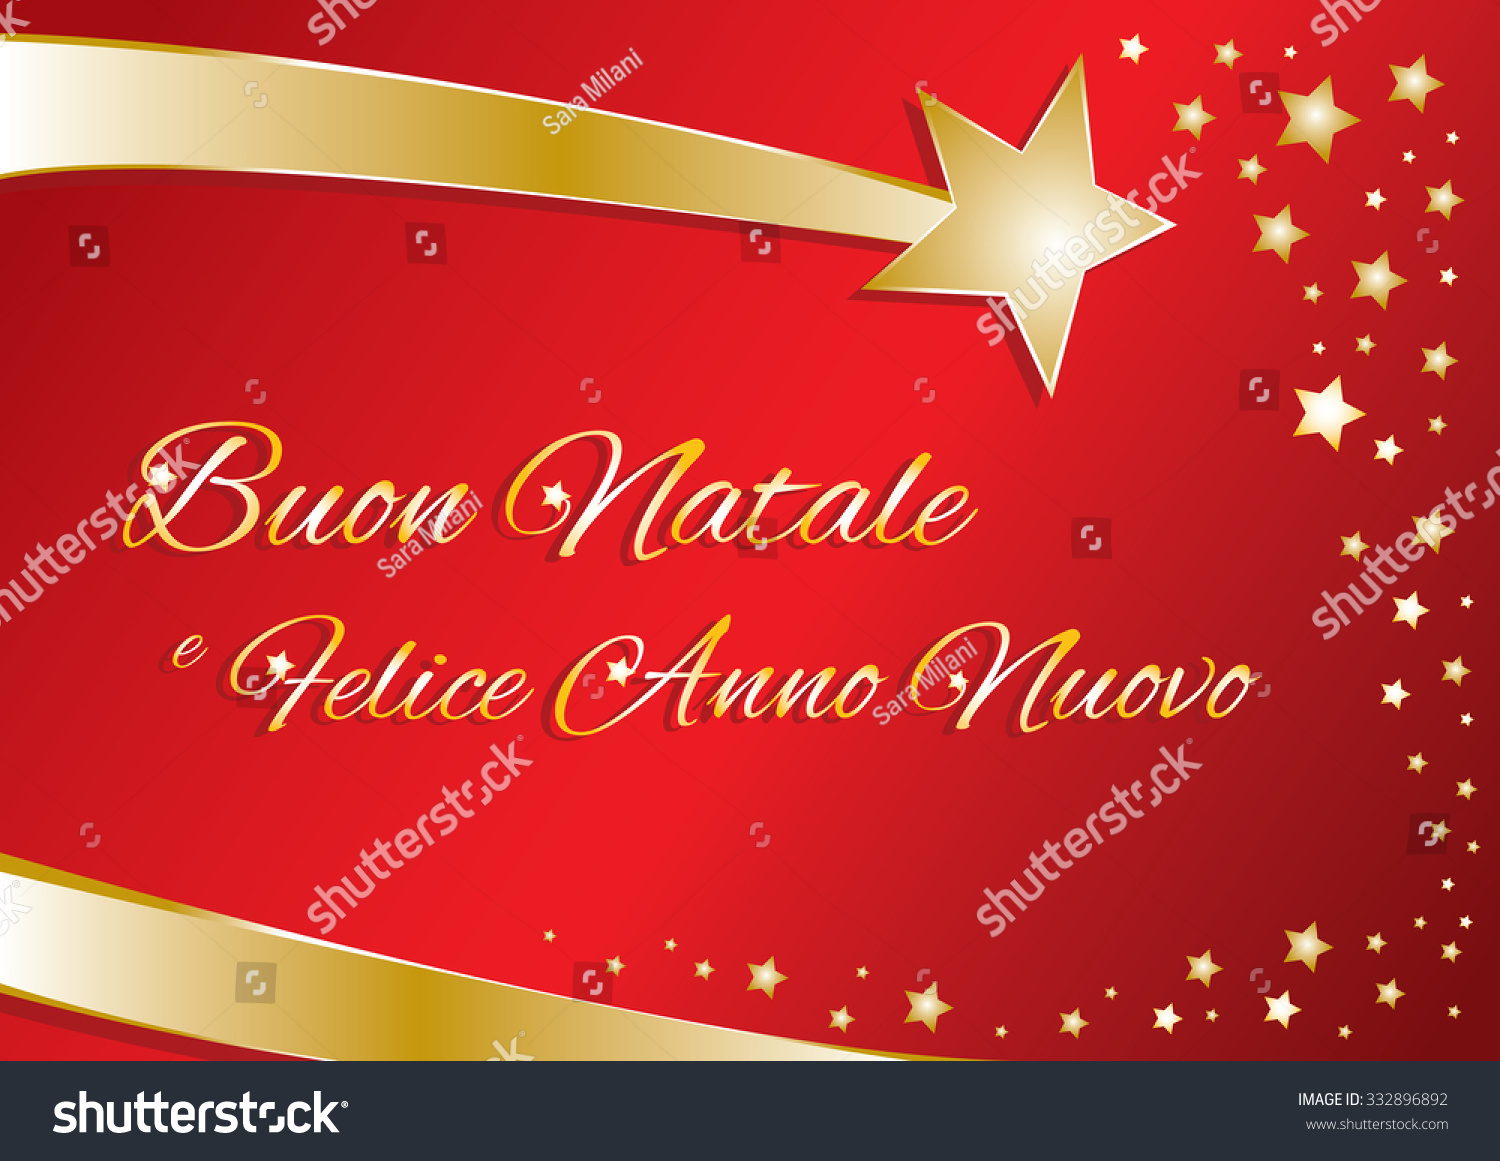 Vector Greeting Card Merry Christmas Happy Stock Vector Royalty Free 332896892